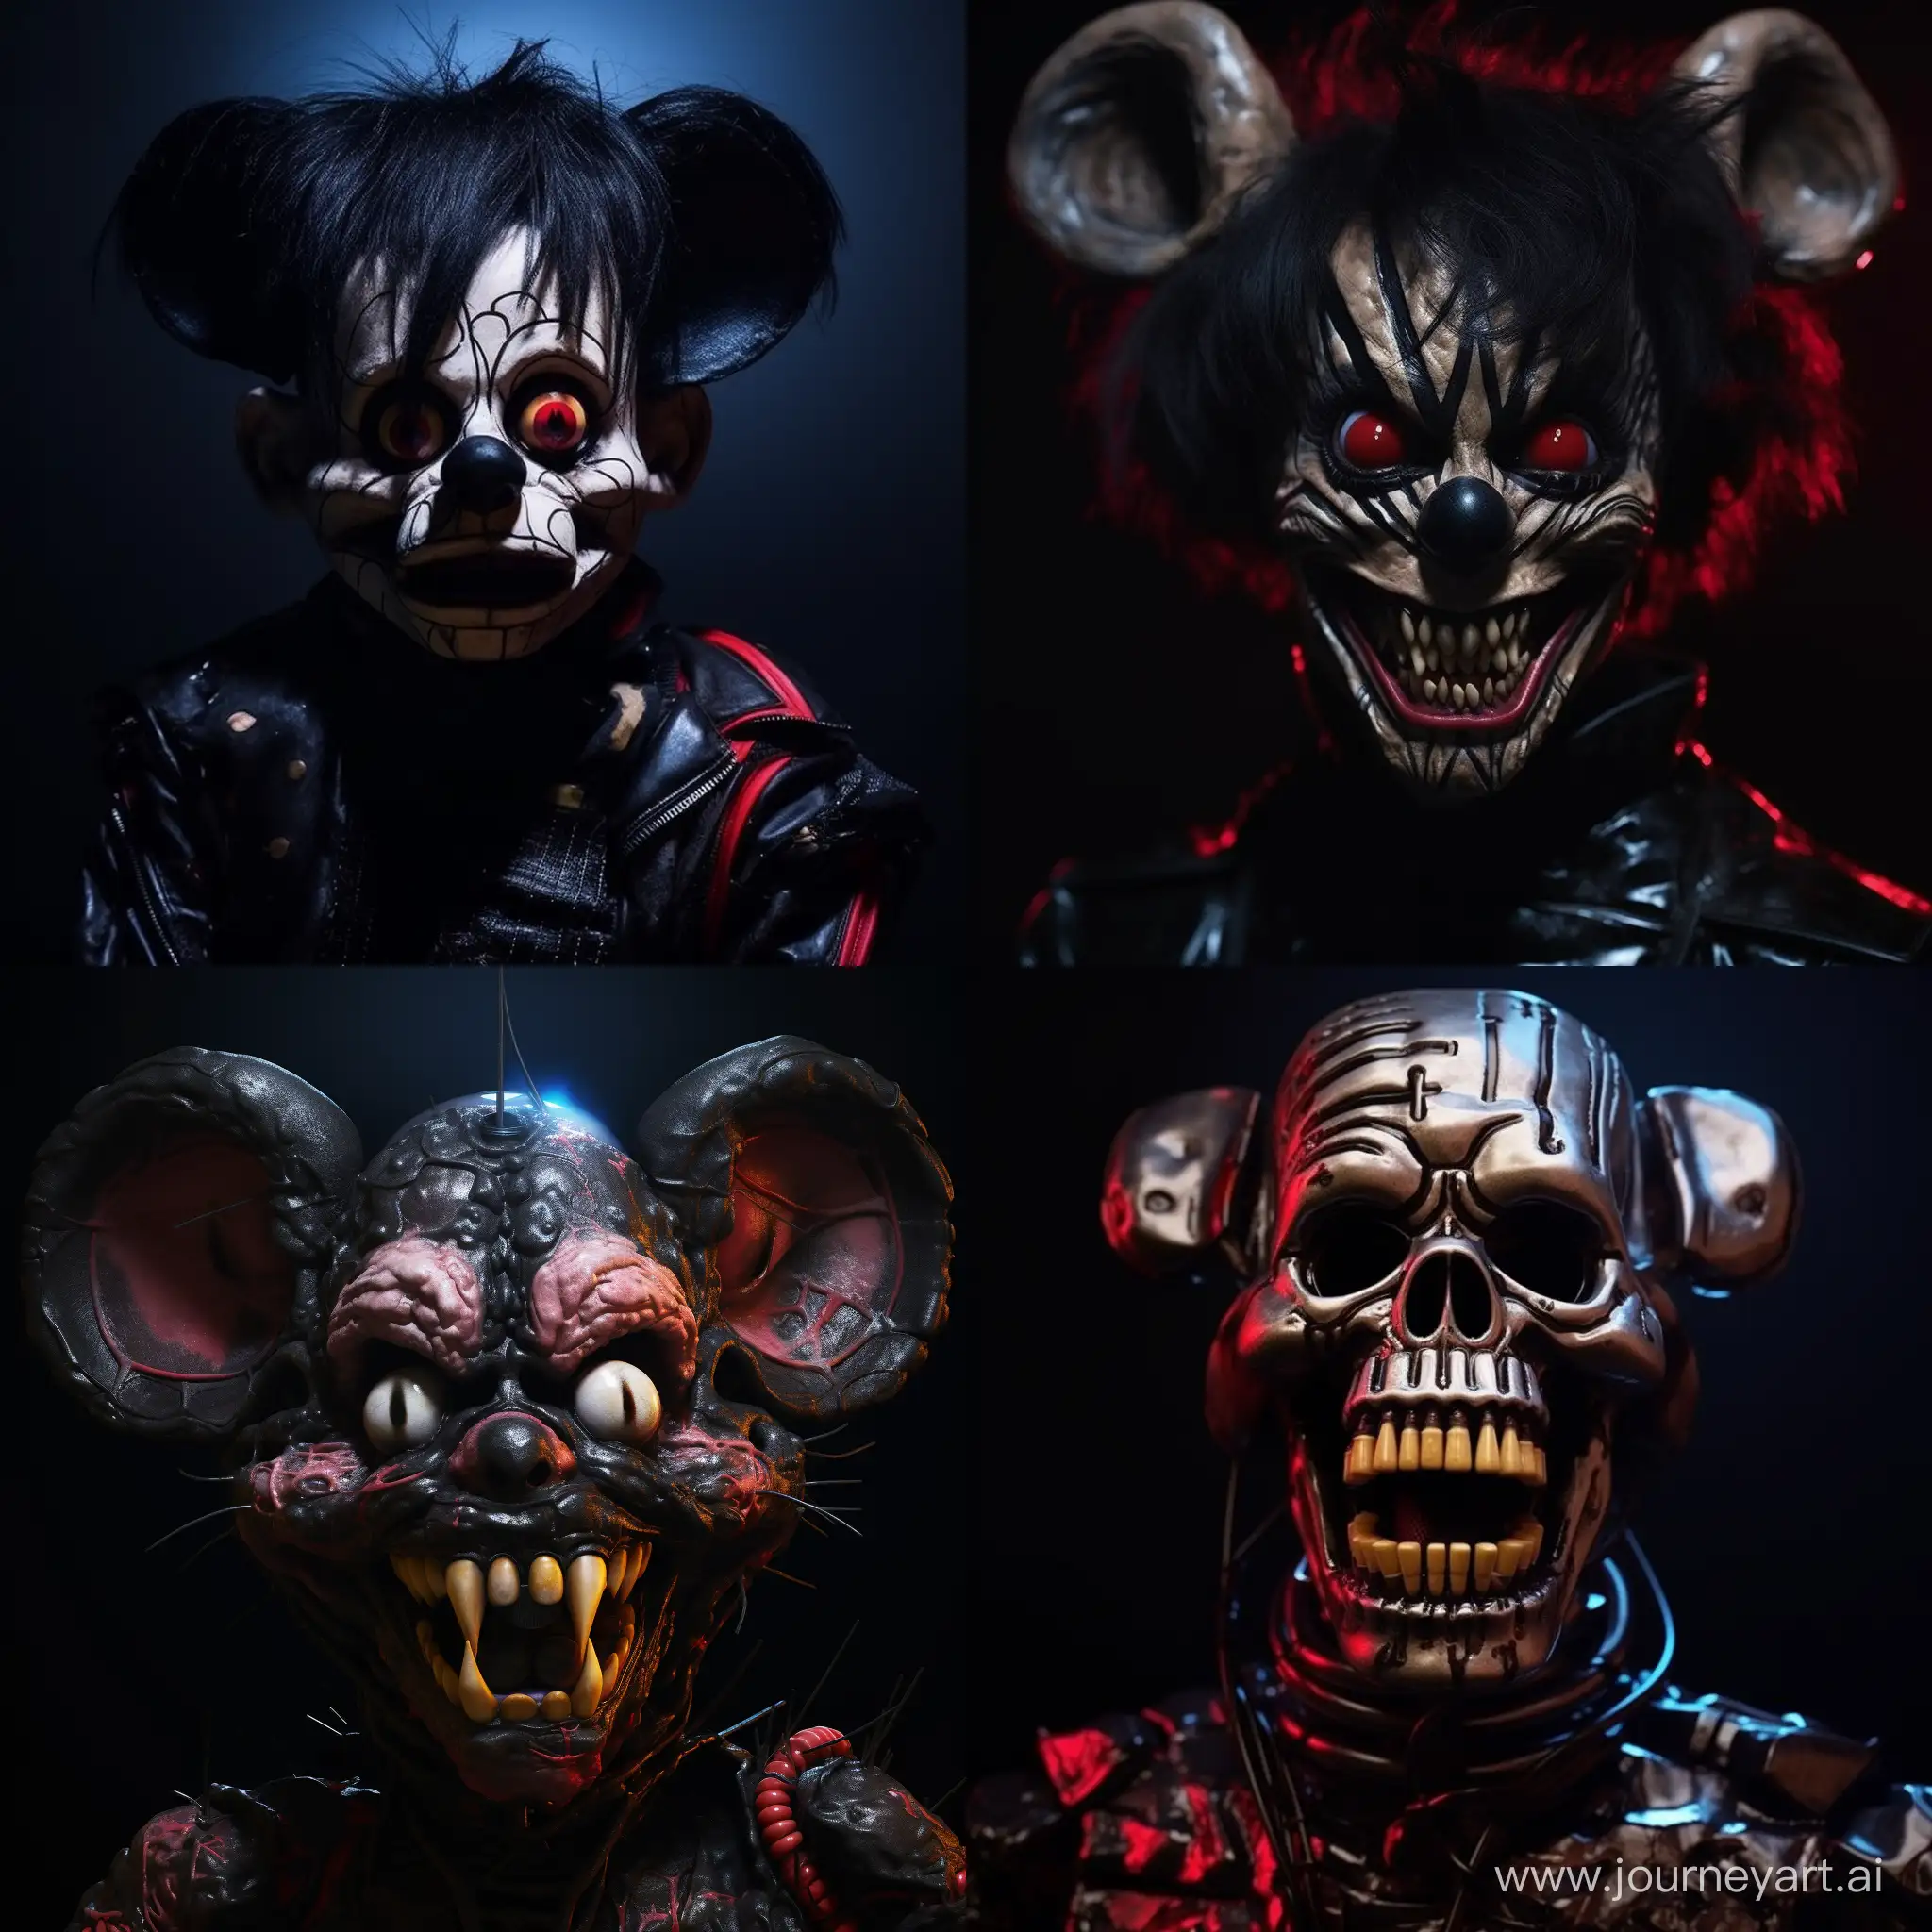 Capturing the essence of the 80s, this close-up portrait photography features a sinister Mickey Mouse-inspired creature with a demonic shiny exoskeleton. The hard surface is intensified against a solid black background, evoking an unsettling yet mesmerizing vibe reminiscent of 80s aesthetics